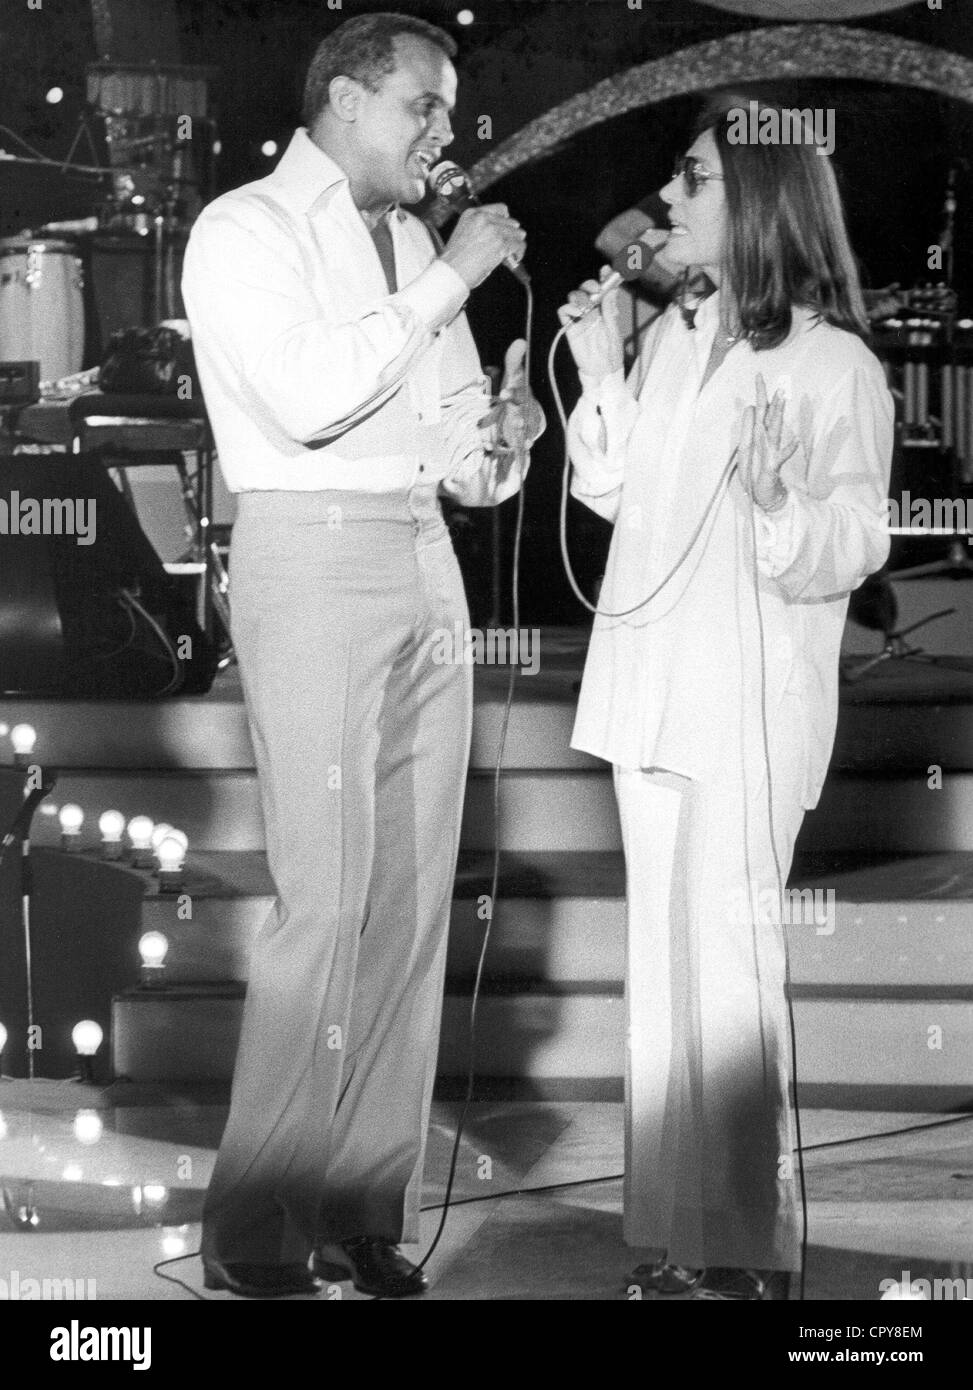 Mouskouri, Nana, * 13.10.1936, Greek singer, full length, with Harry Belafonte, during a show, 1970s, Stock Photo